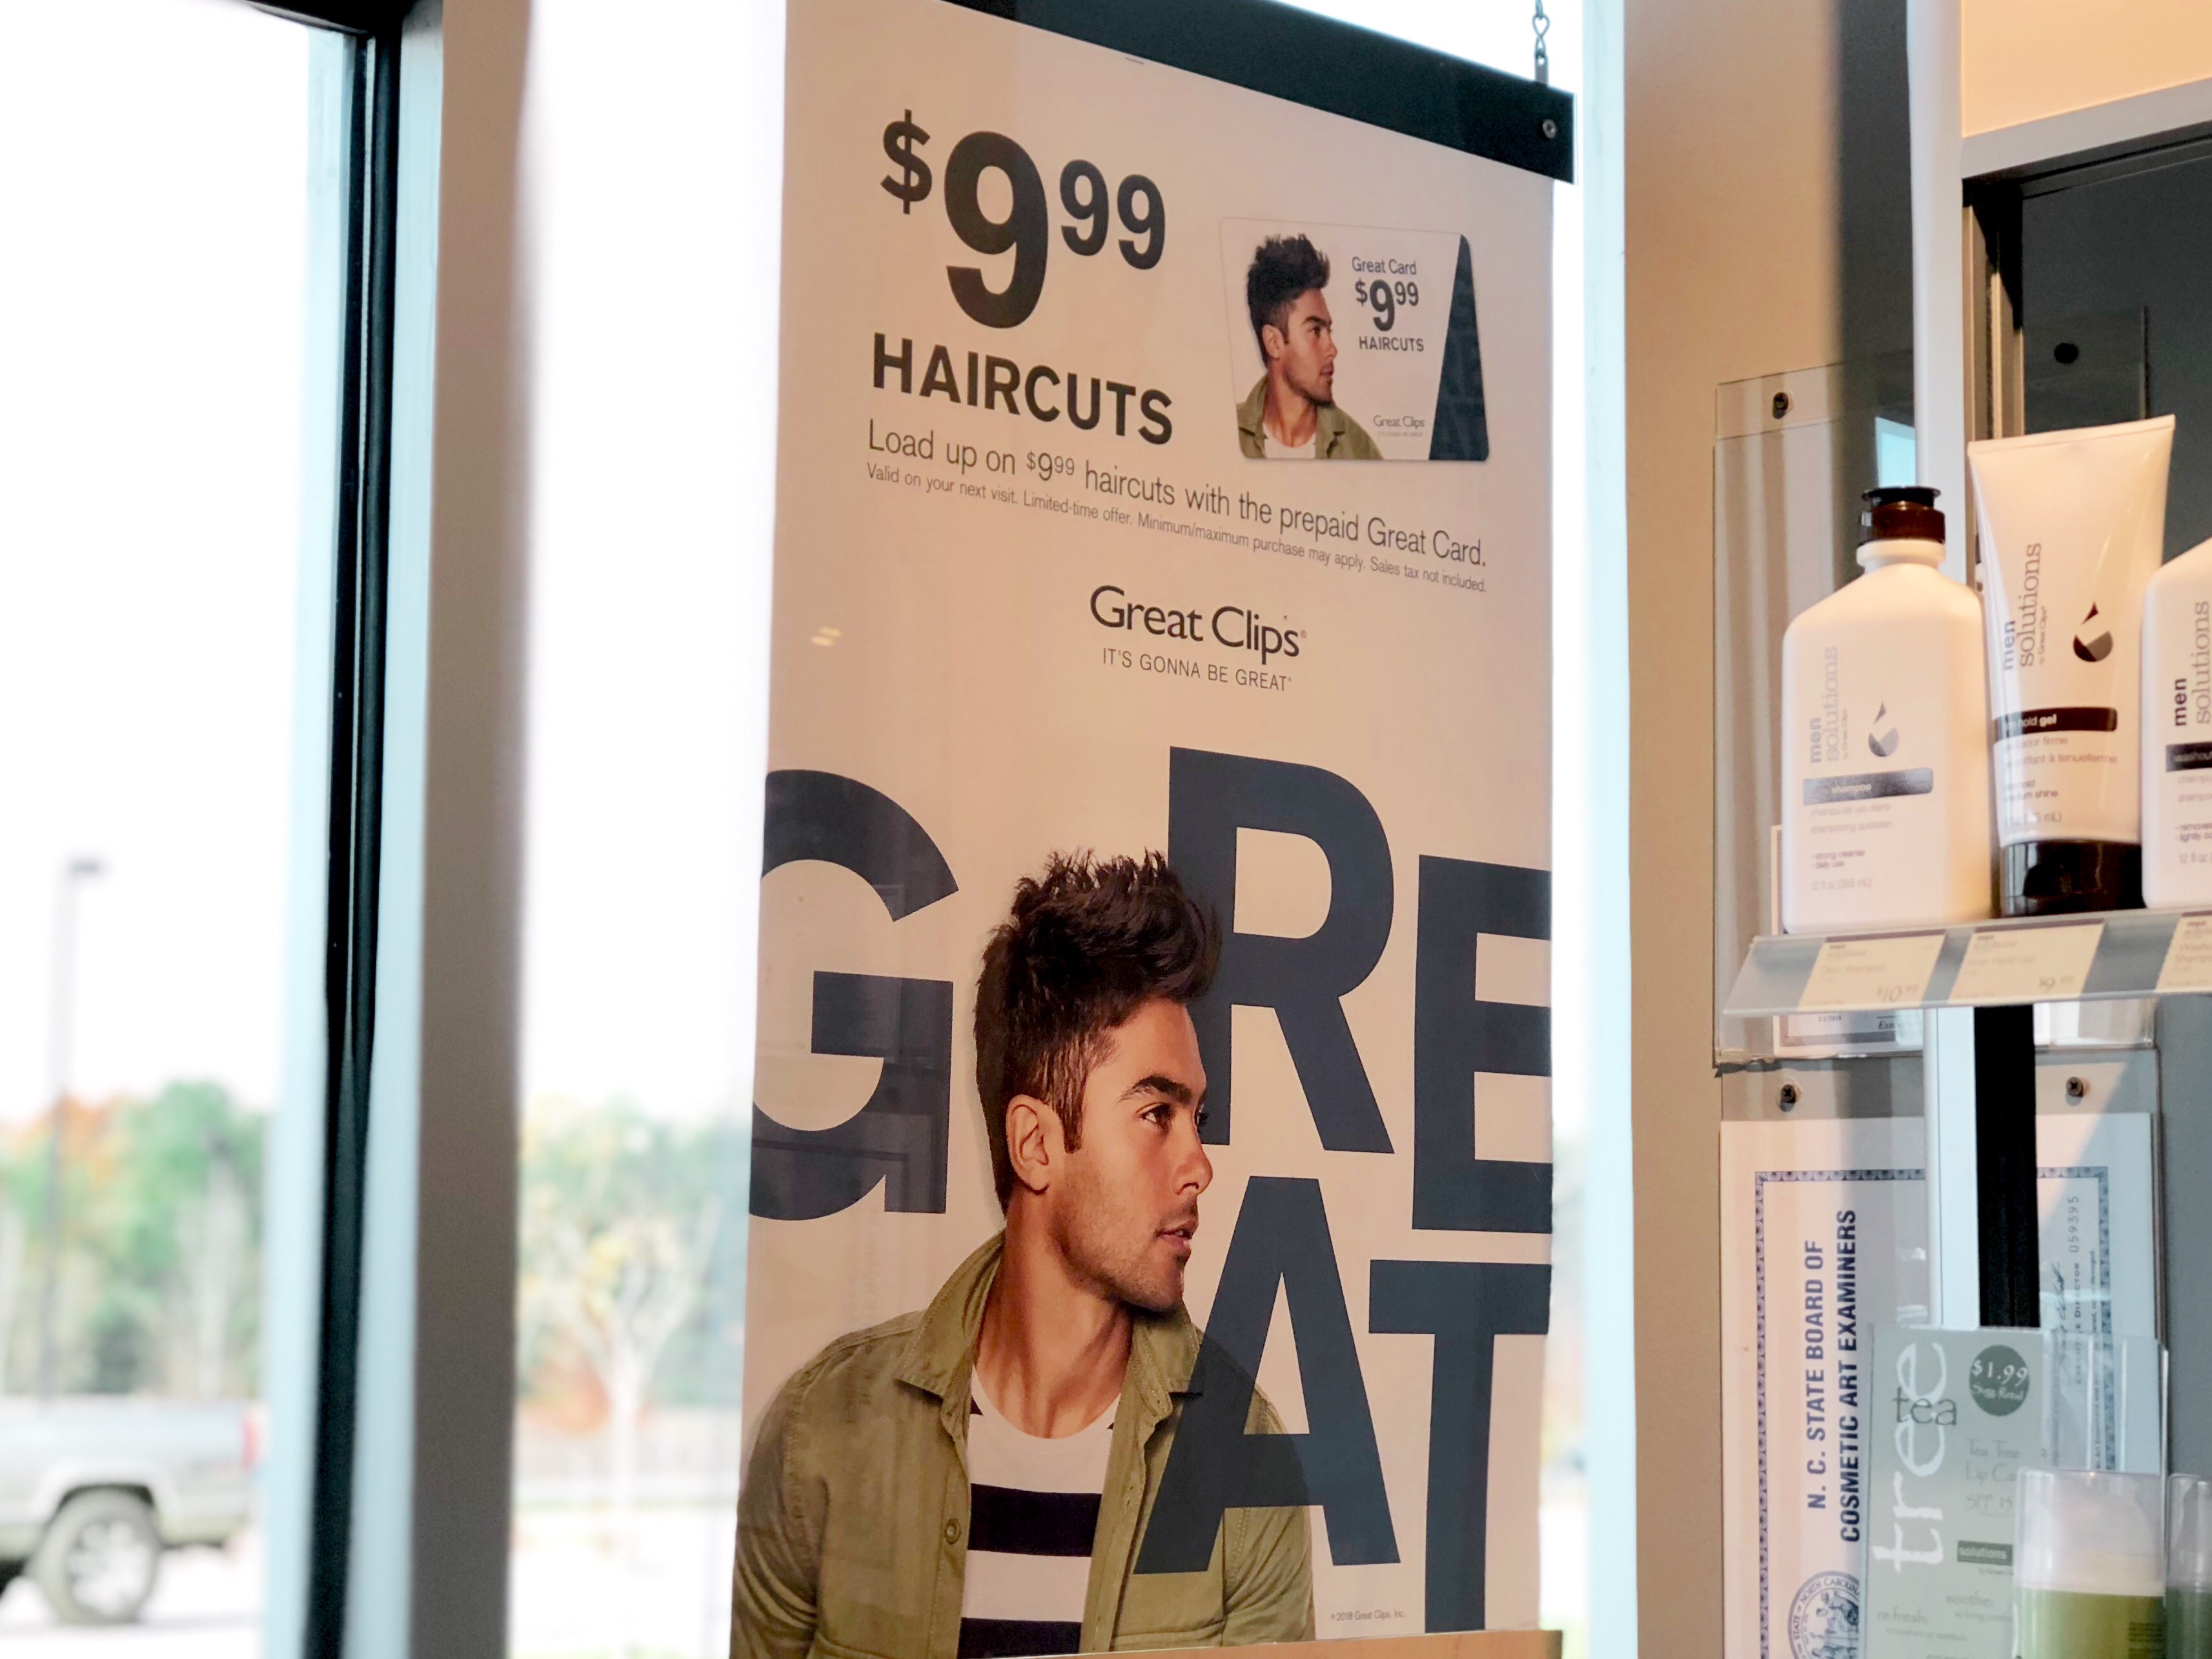 Great Clips Great Card = 9.99 Haircuts